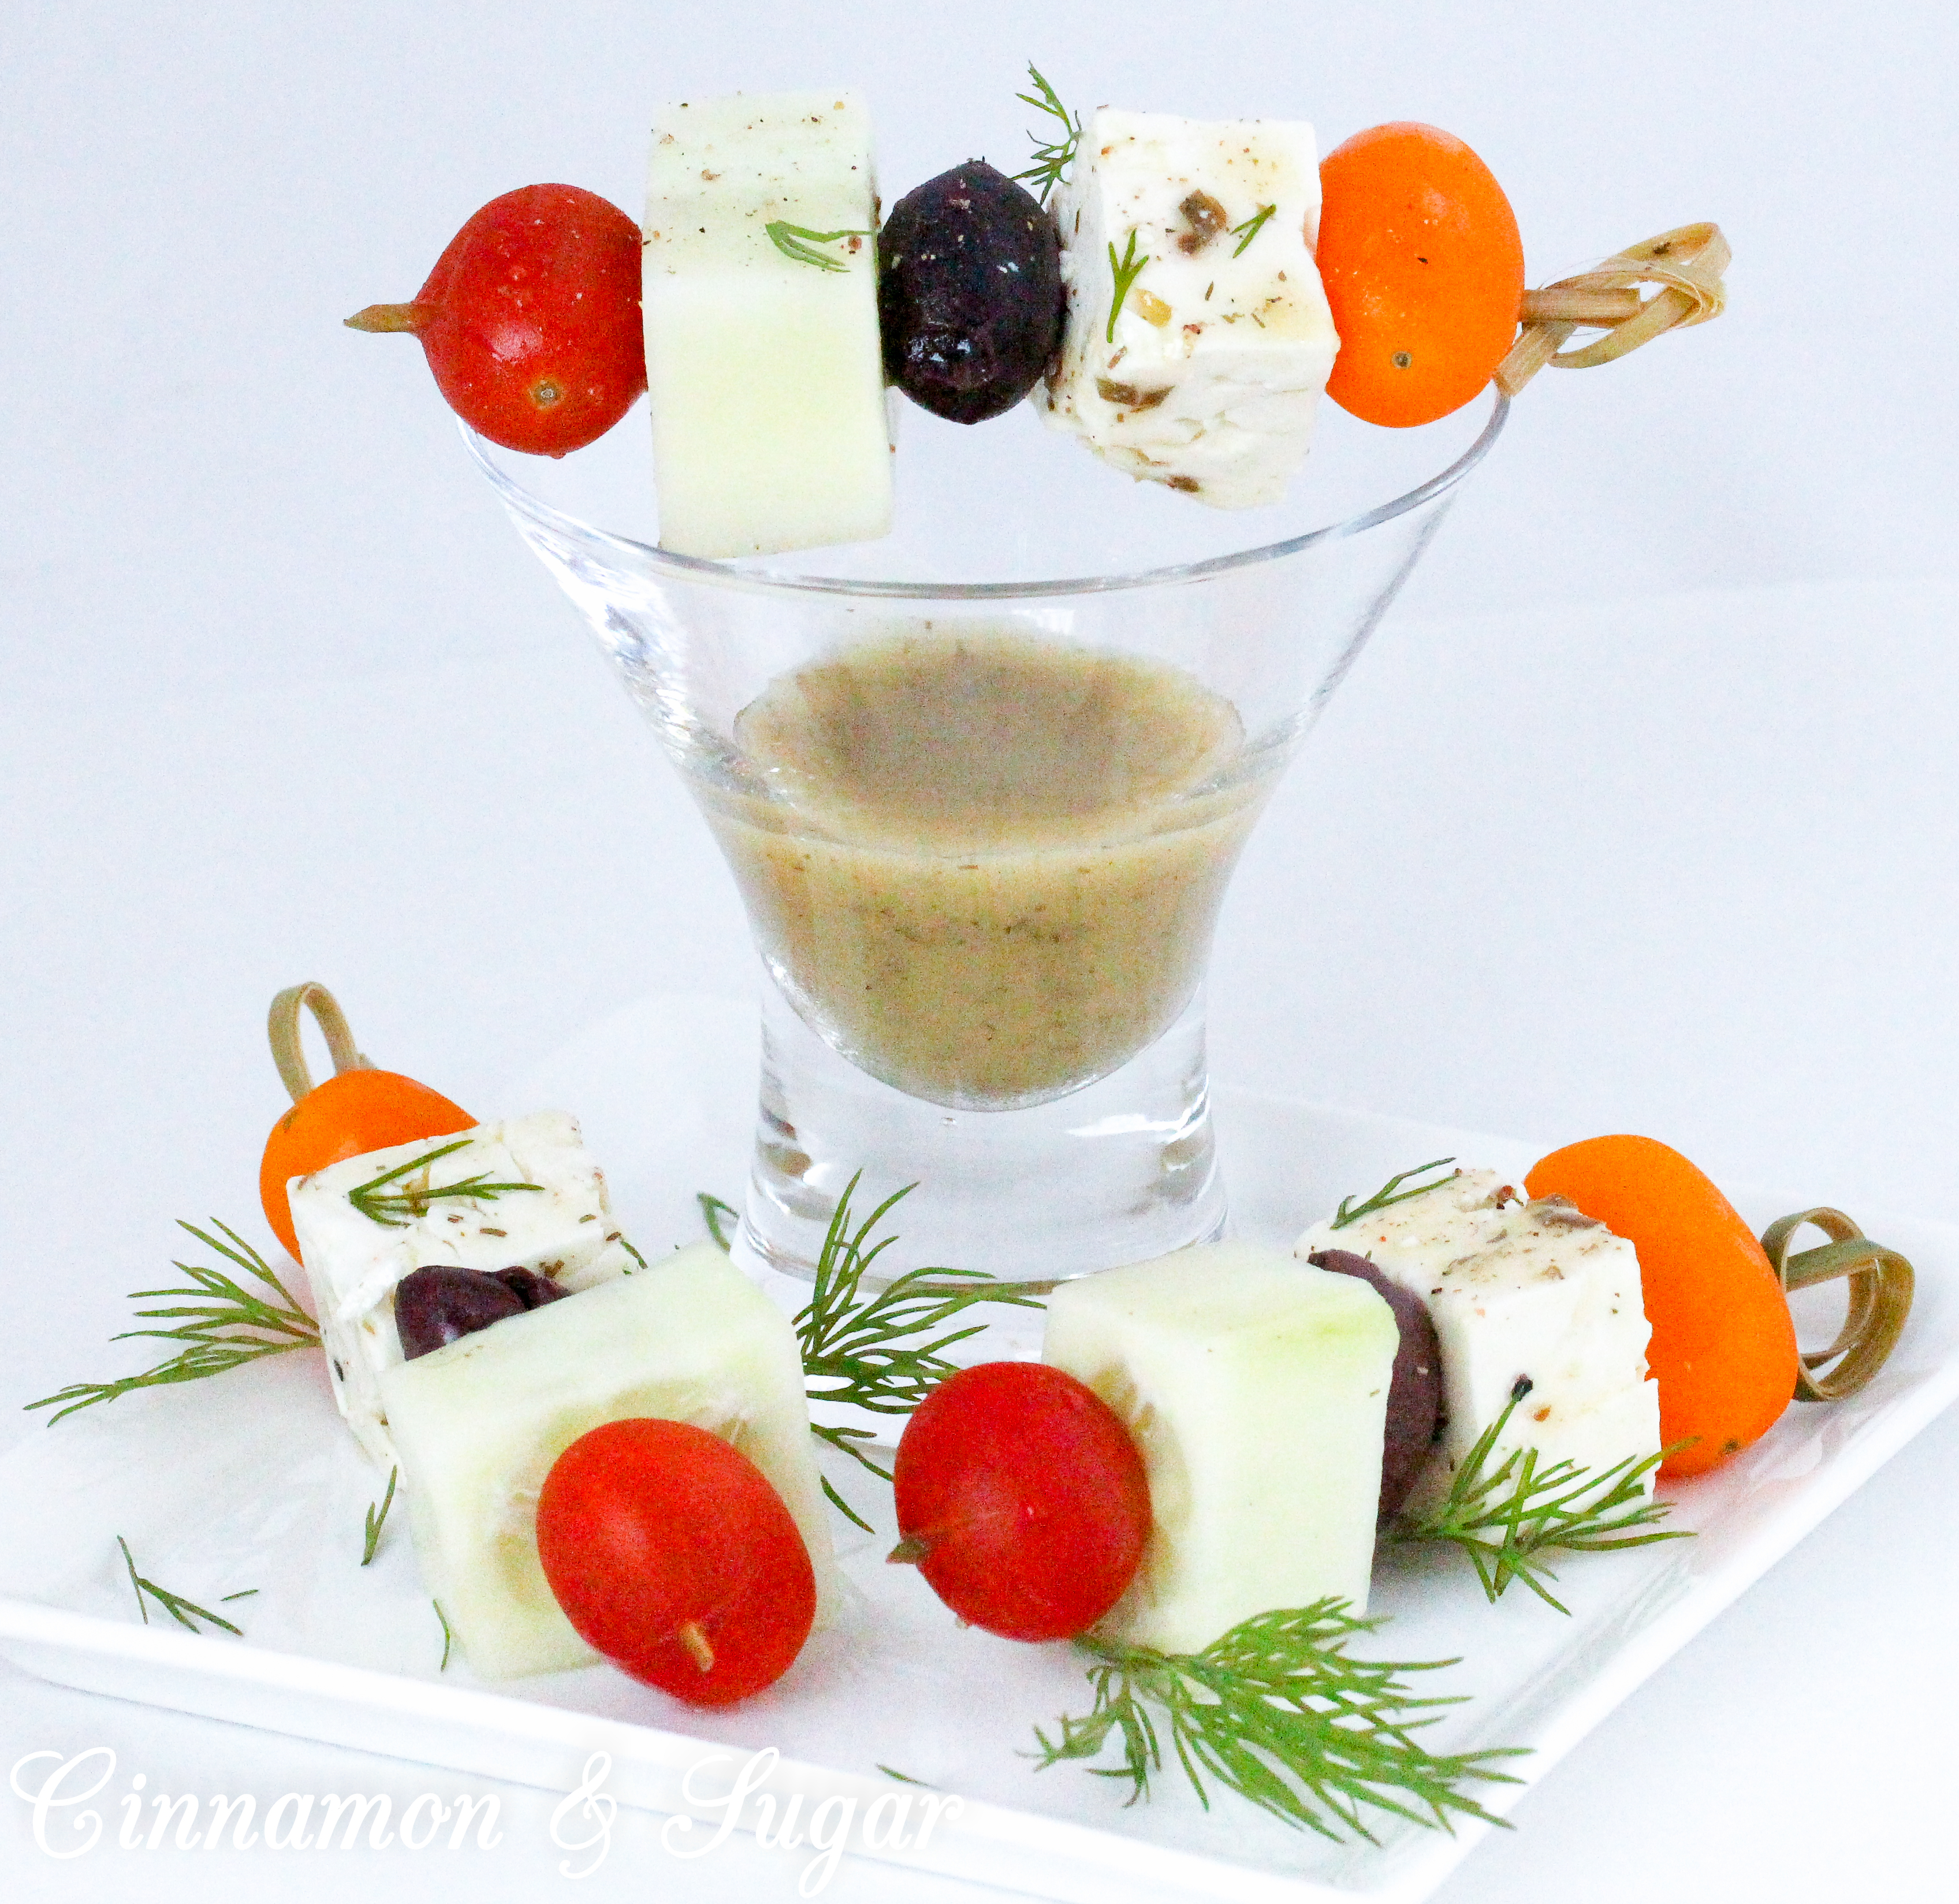 Light and refreshing, Greek Salad Skewers are mini appetizers that are quick to make and provide a fun, healthy way to satisfy pre-dinner appetites. Recipe shared with permission granted by Jenn McKinlay, author of WORD TO THE WISE.